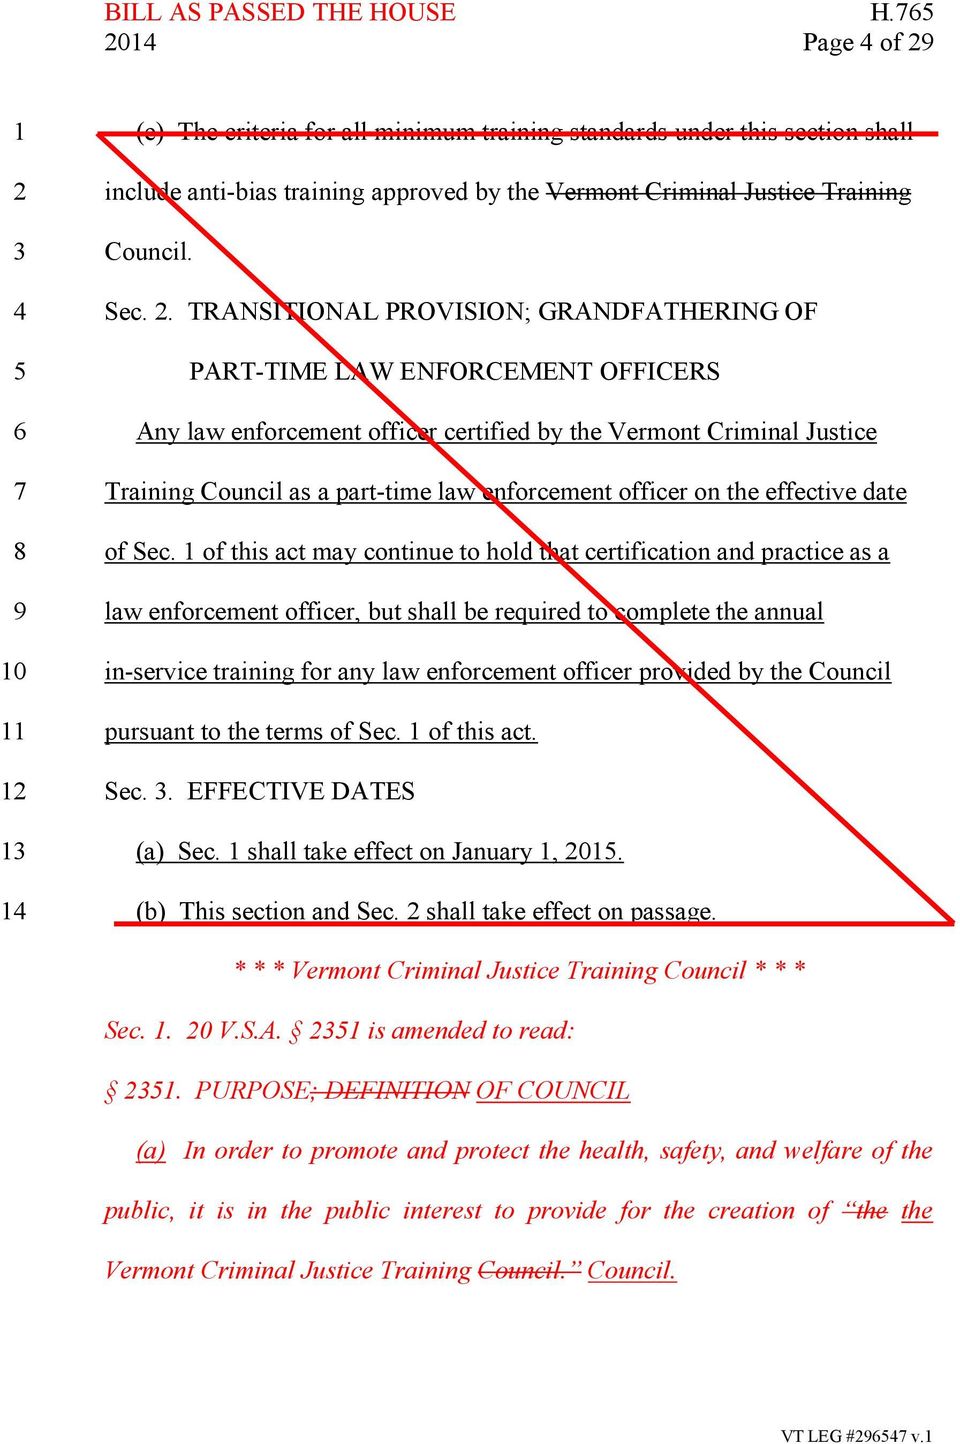 3 include anti-bias training approved by the Vermont Criminal Justice Training Council. Sec. 2.